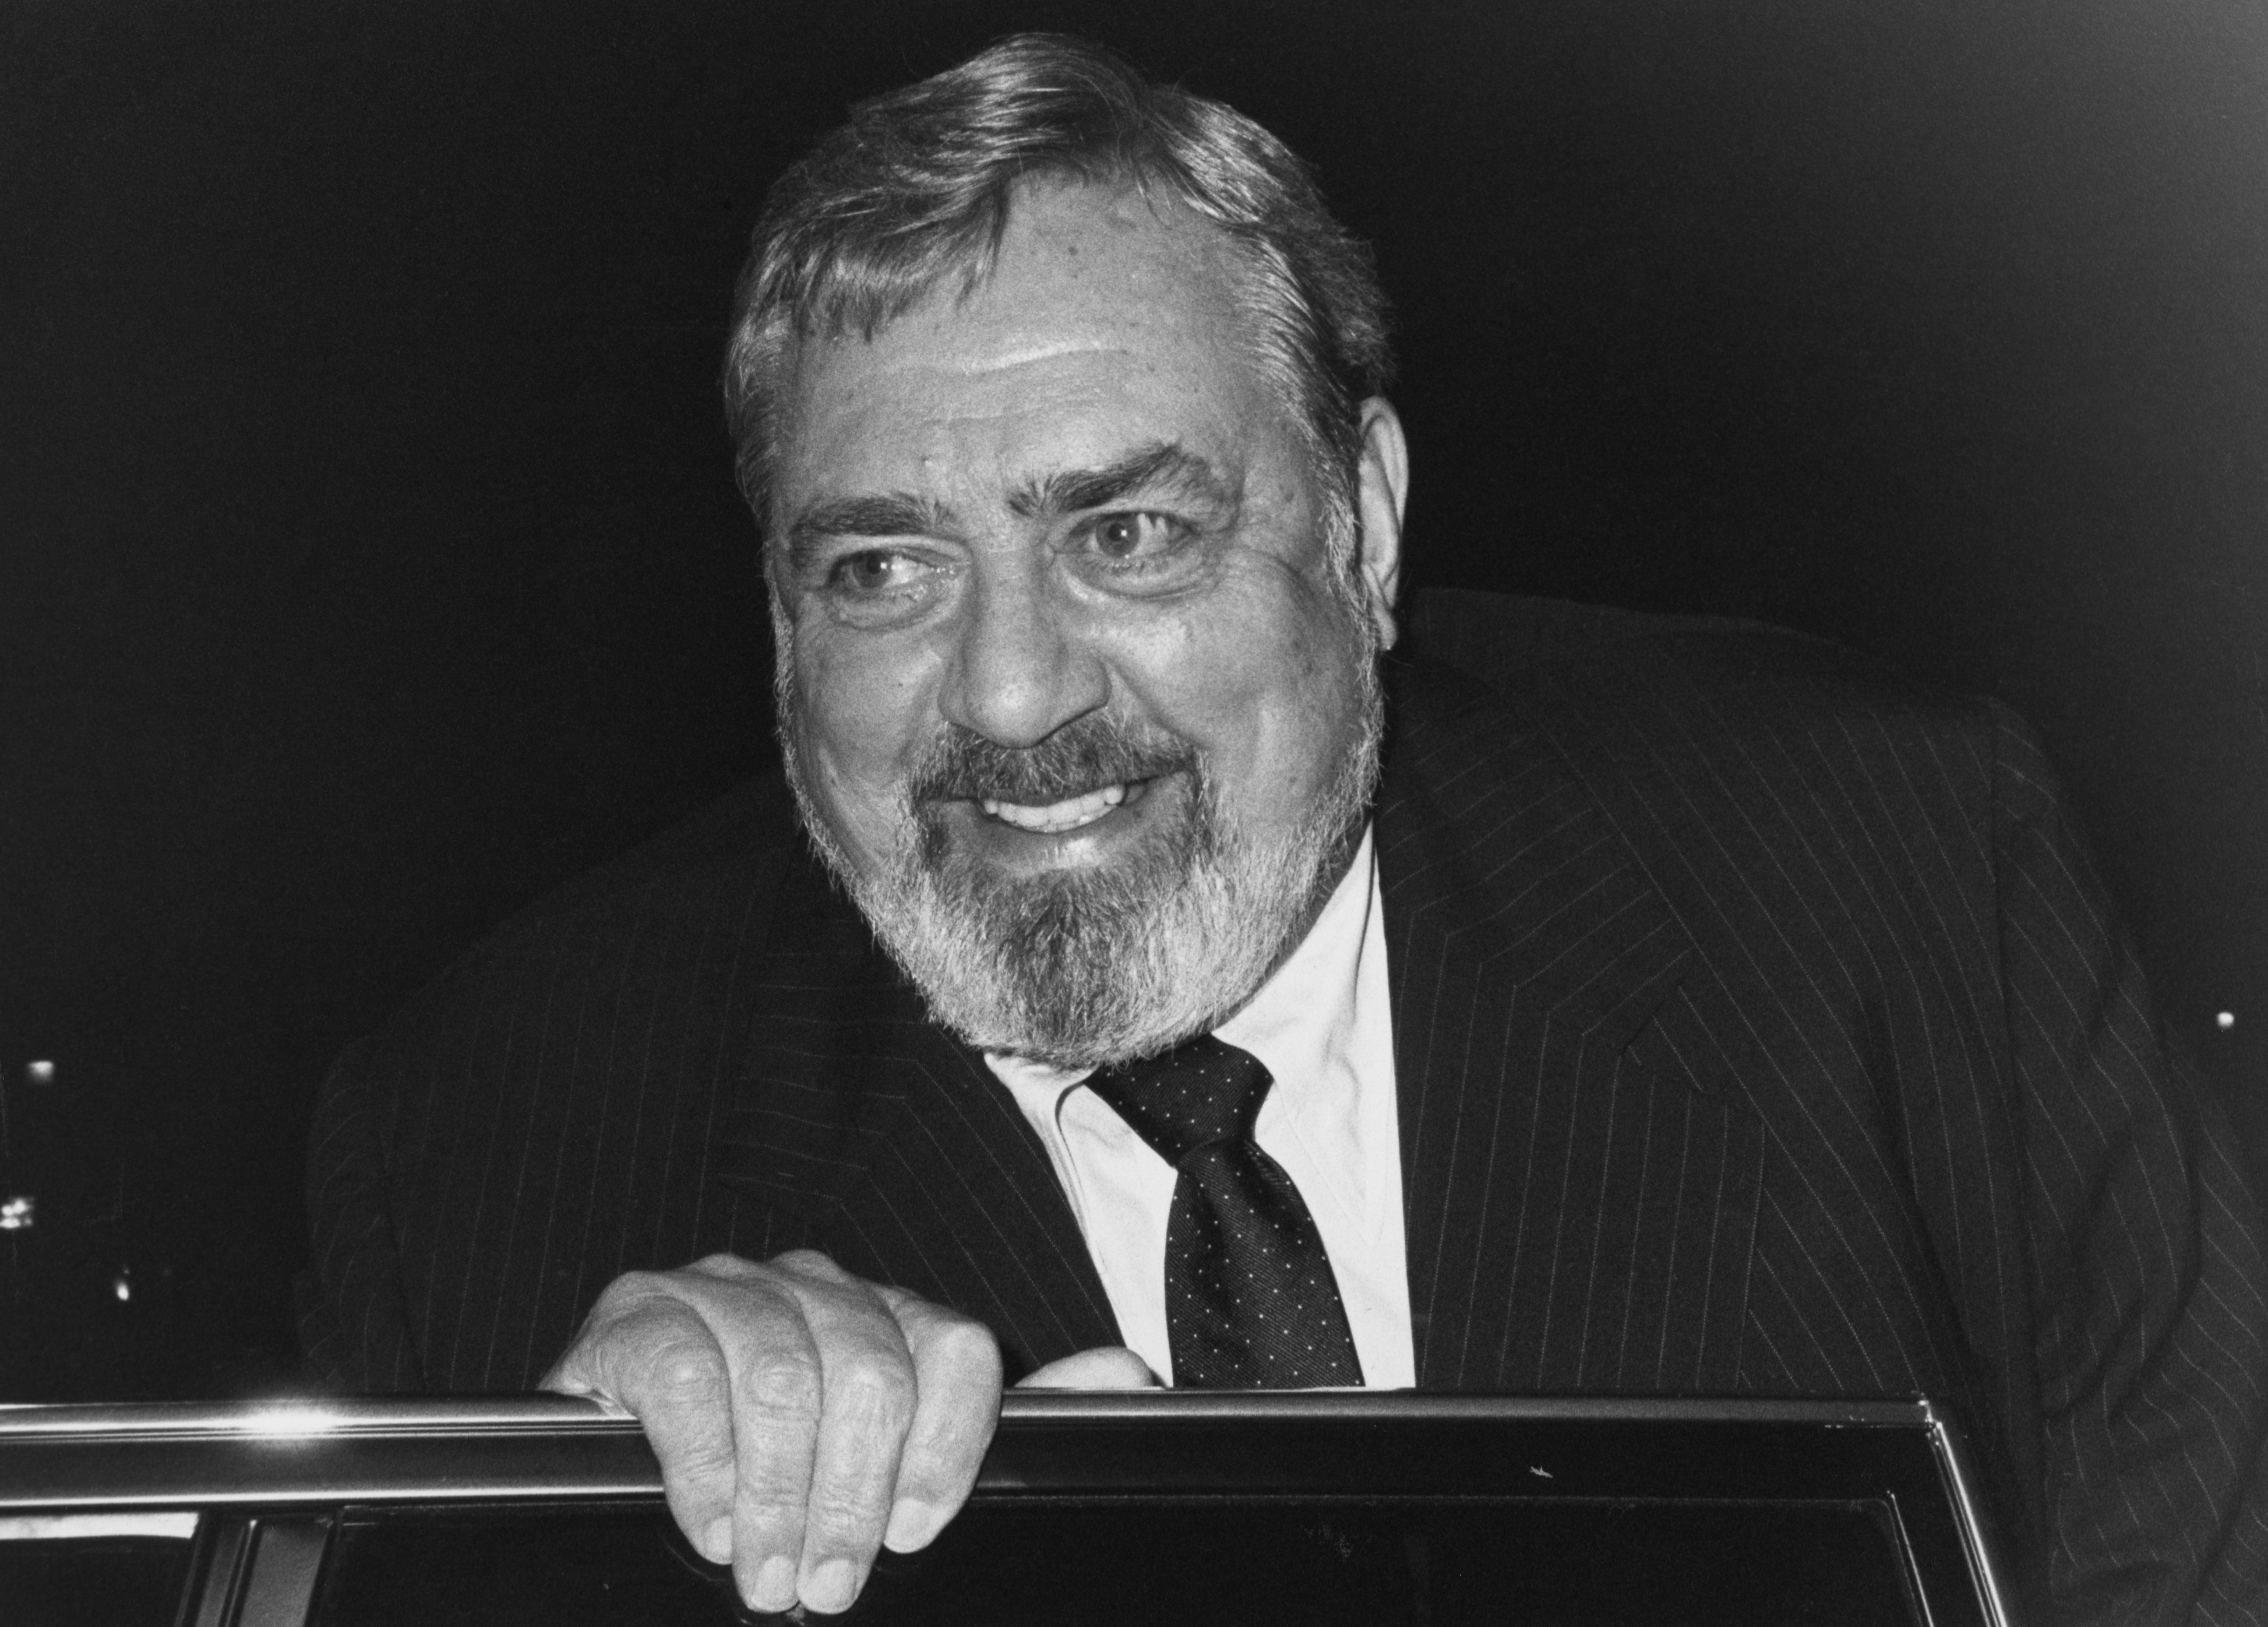 Raymond Burr photographed smiling with his hand on a car door in 1985 Los Angeles, California. | Source: Getty Images